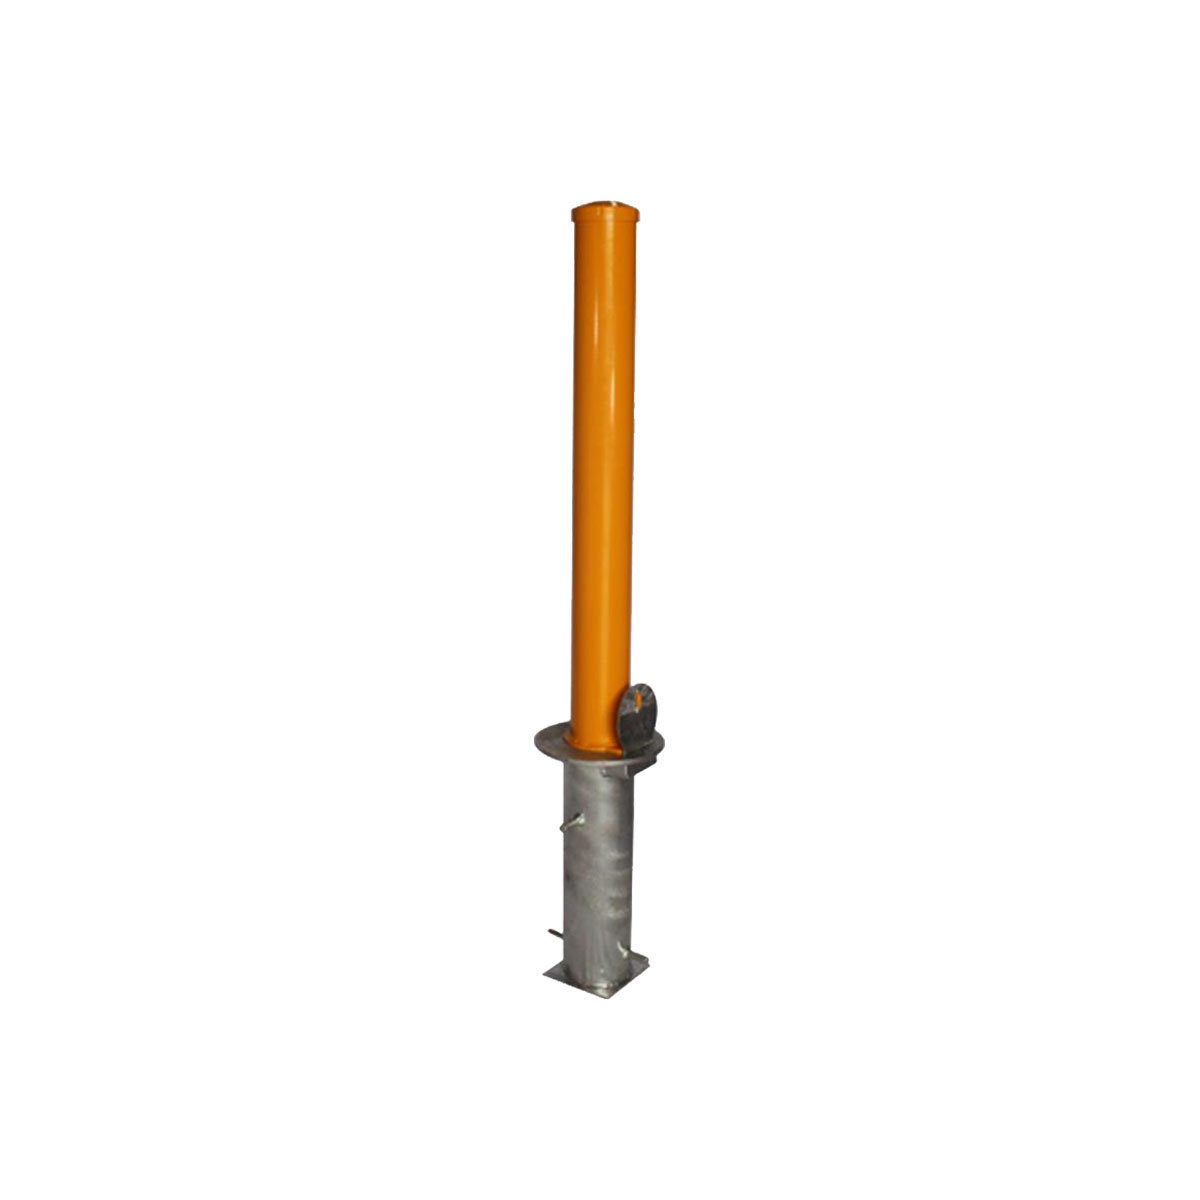 Buy Cast-in Bollard - Removable (PC over Galv) in Cast-in Bollards from GuardX available at Astrolift NZ